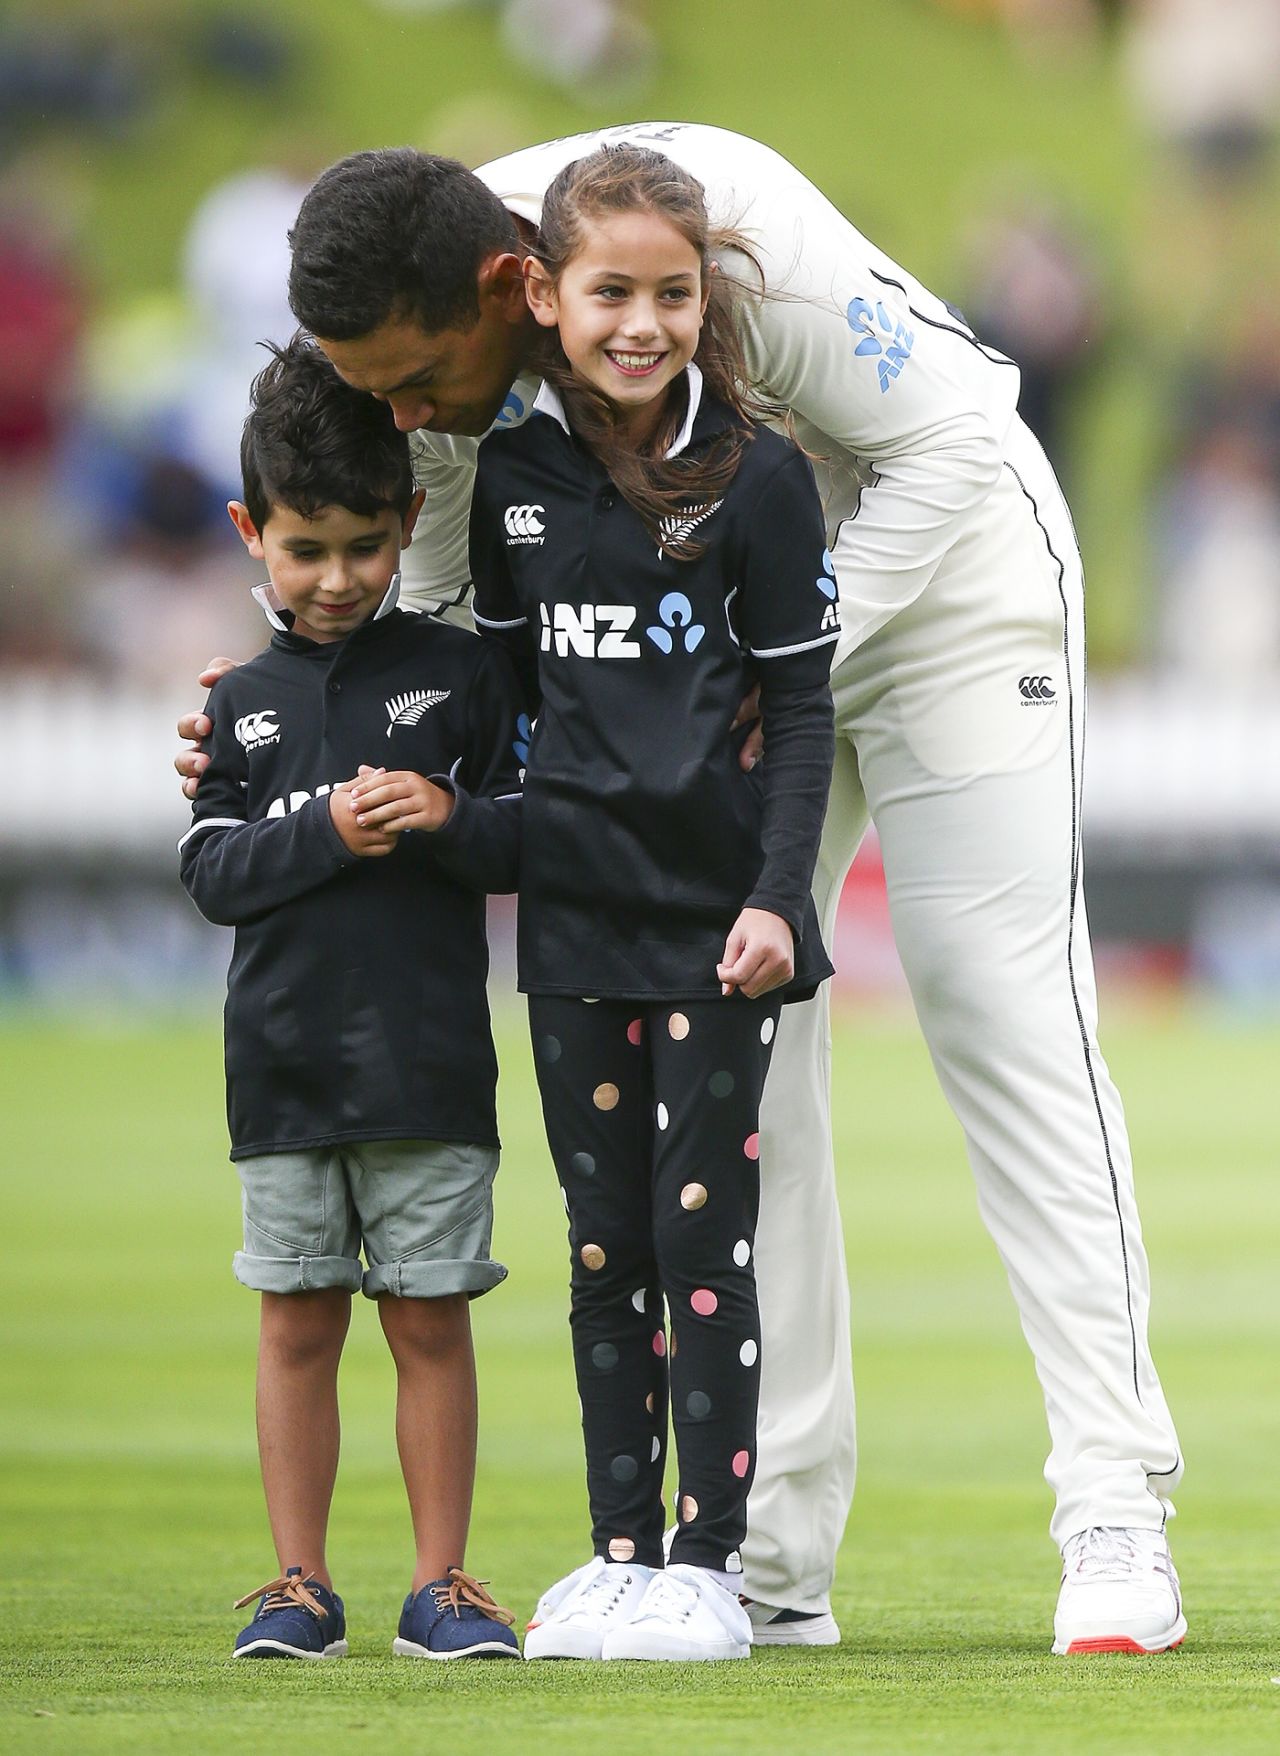 Ross Taylor with two of his children ahead of playing his 100th Test, New Zealand v India, 1st Test, Wellington, 1st day, February 21, 2019